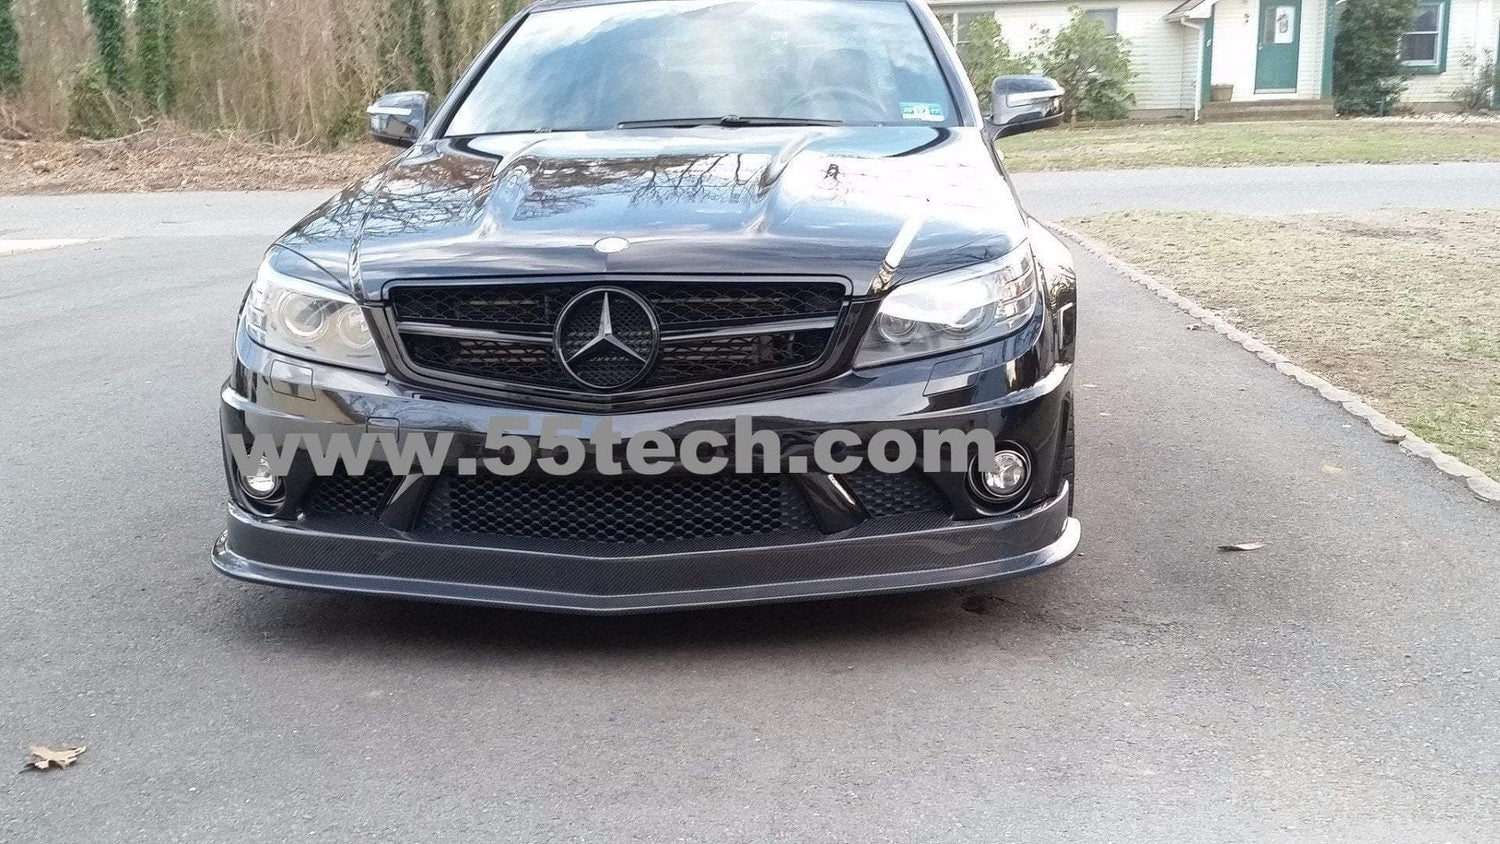 W204 C63 AMG Grille 2008~2011 (C63 AMG ONLY) - 55tech Motors